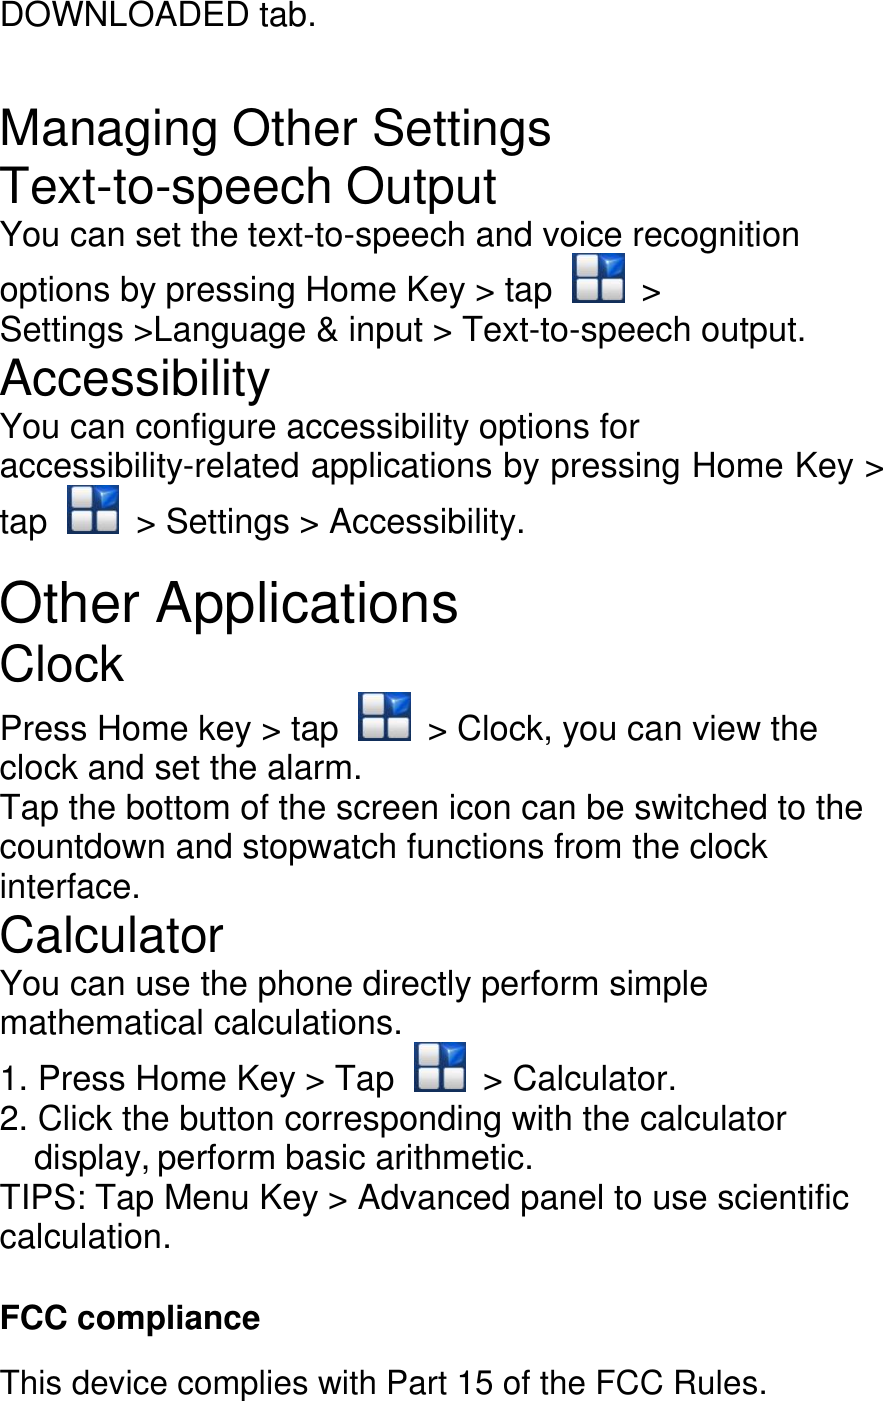 DOWNLOADED tab.  Managing Other Settings Text-to-speech Output You can set the text-to-speech and voice recognition options by pressing Home Key &gt; tap    &gt; Settings &gt;Language &amp; input &gt; Text-to-speech output. Accessibility You can configure accessibility options for accessibility-related applications by pressing Home Key &gt; tap    &gt; Settings &gt; Accessibility.  Other Applications Clock Press Home key &gt; tap    &gt; Clock, you can view the clock and set the alarm. Tap the bottom of the screen icon can be switched to the countdown and stopwatch functions from the clock interface. Calculator You can use the phone directly perform simple mathematical calculations. 1. Press Home Key &gt; Tap    &gt; Calculator. 2. Click the button corresponding with the calculator display, perform basic arithmetic. TIPS: Tap Menu Key &gt; Advanced panel to use scientific calculation.  FCC compliance This device complies with Part 15 of the FCC Rules. 